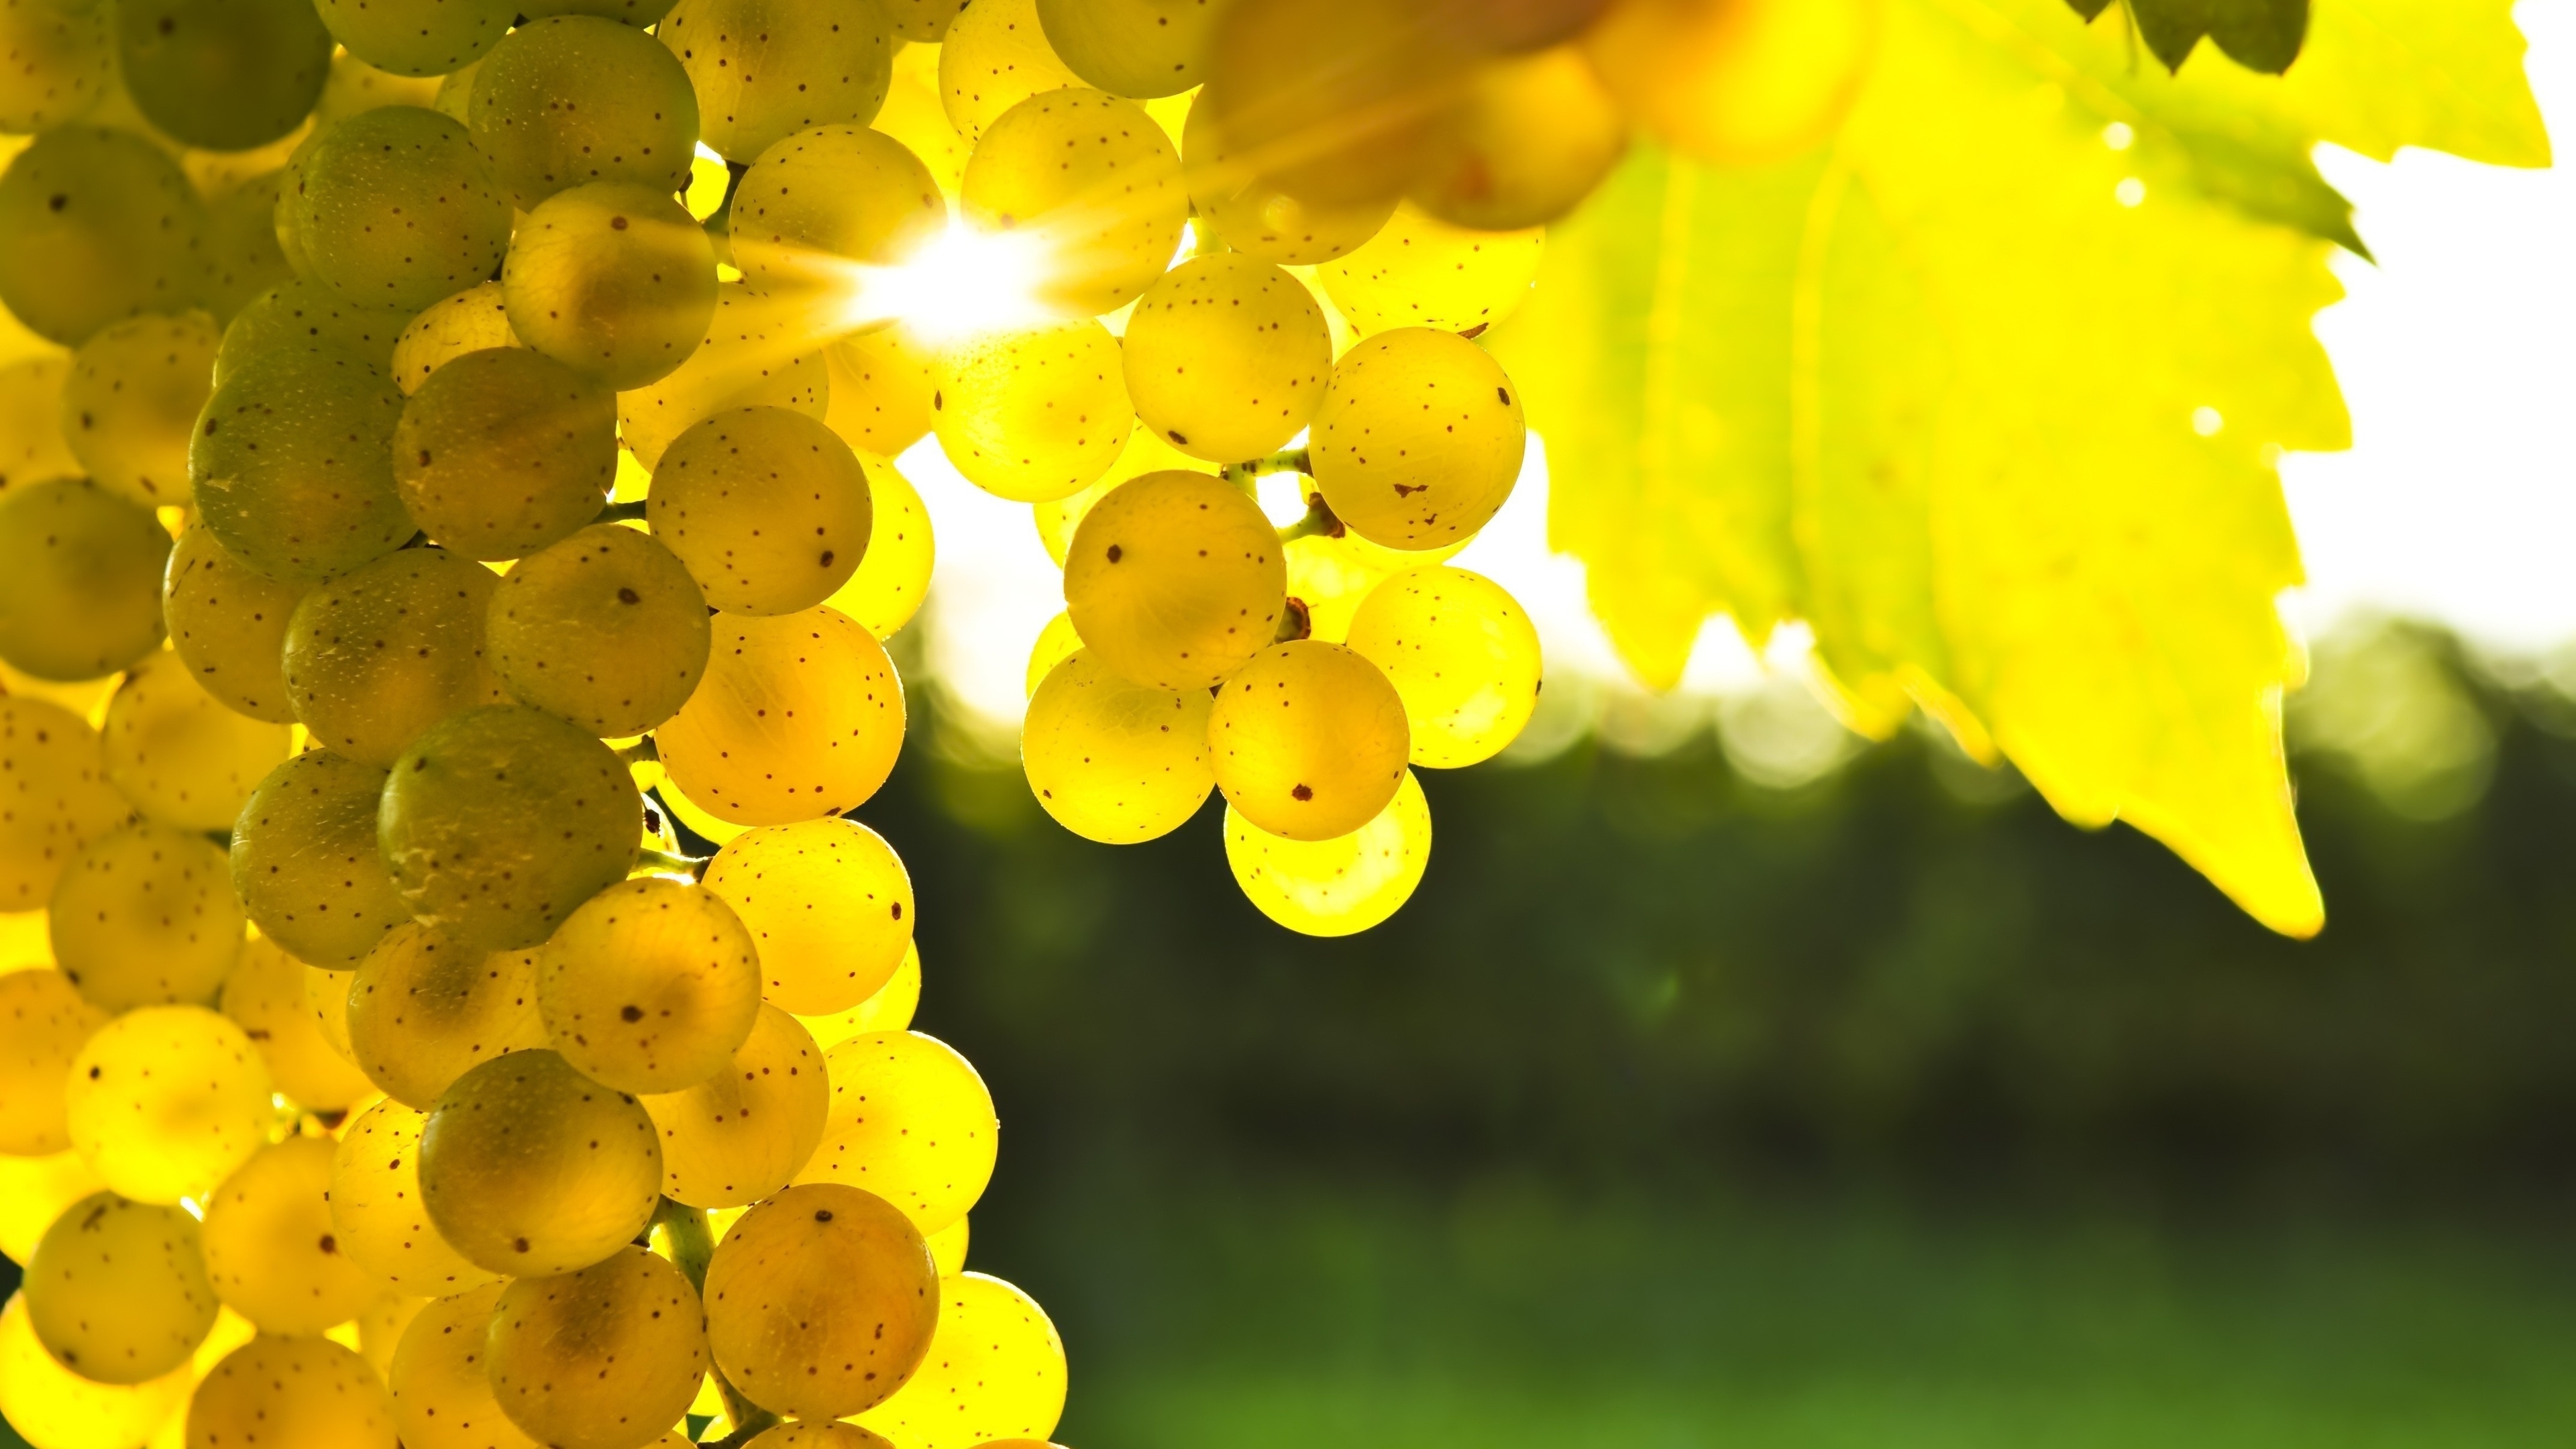 Golden Grapes for 3840 x 2160 Ultra HD resolution